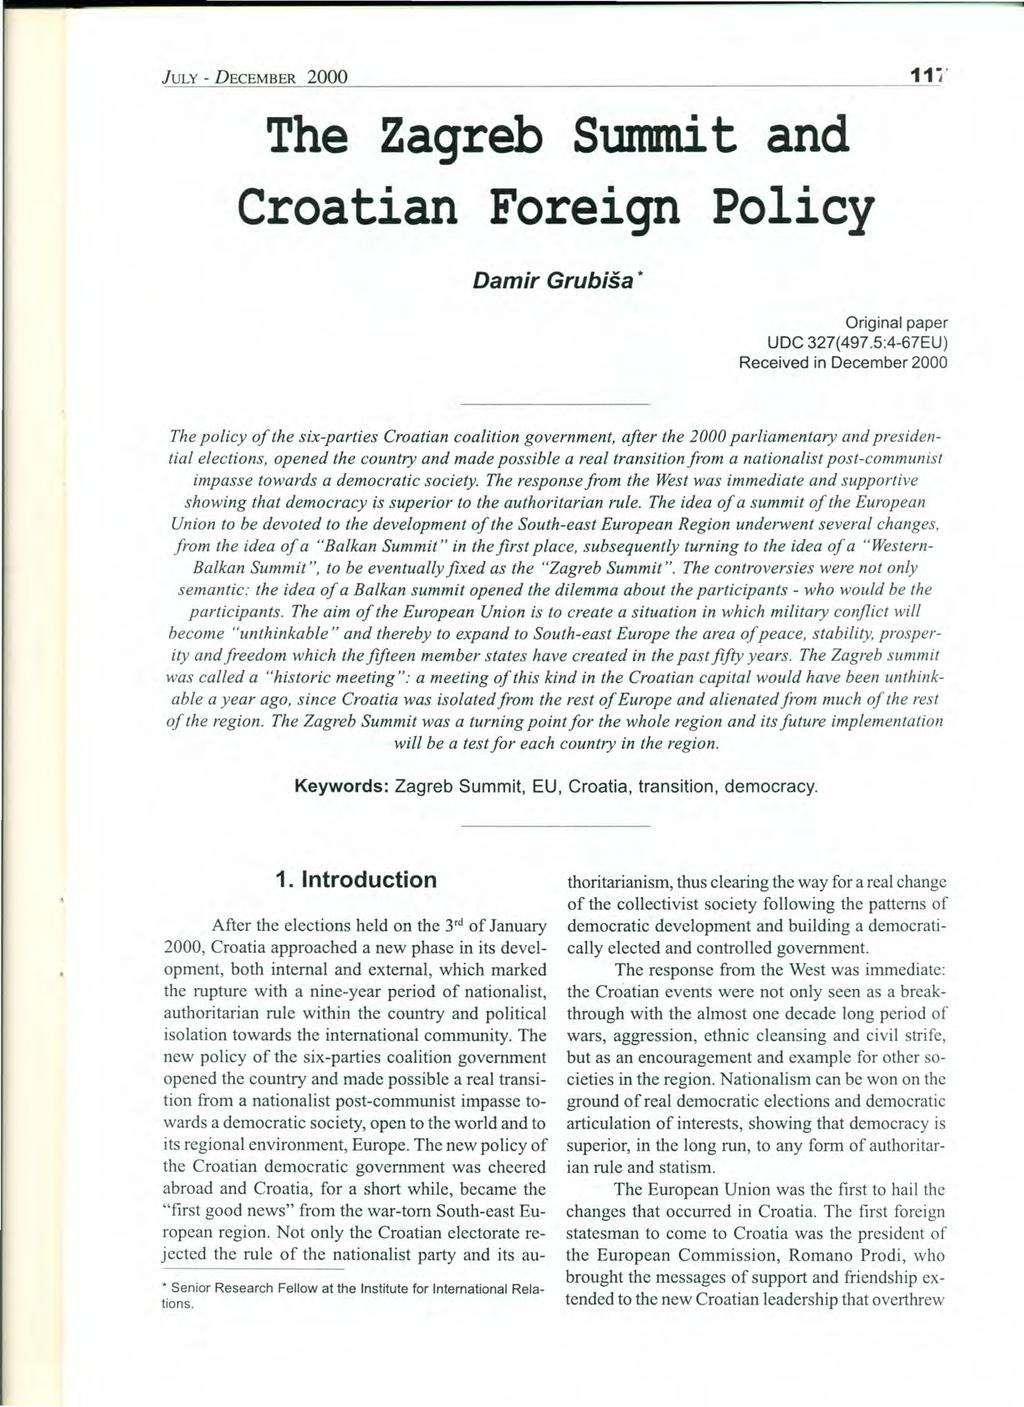 JULY - DECEMBER 2000 iii' The Zagreb Summit and Croatian Foreign Policy Damir Grubisa * Original paper UDC 327(497.